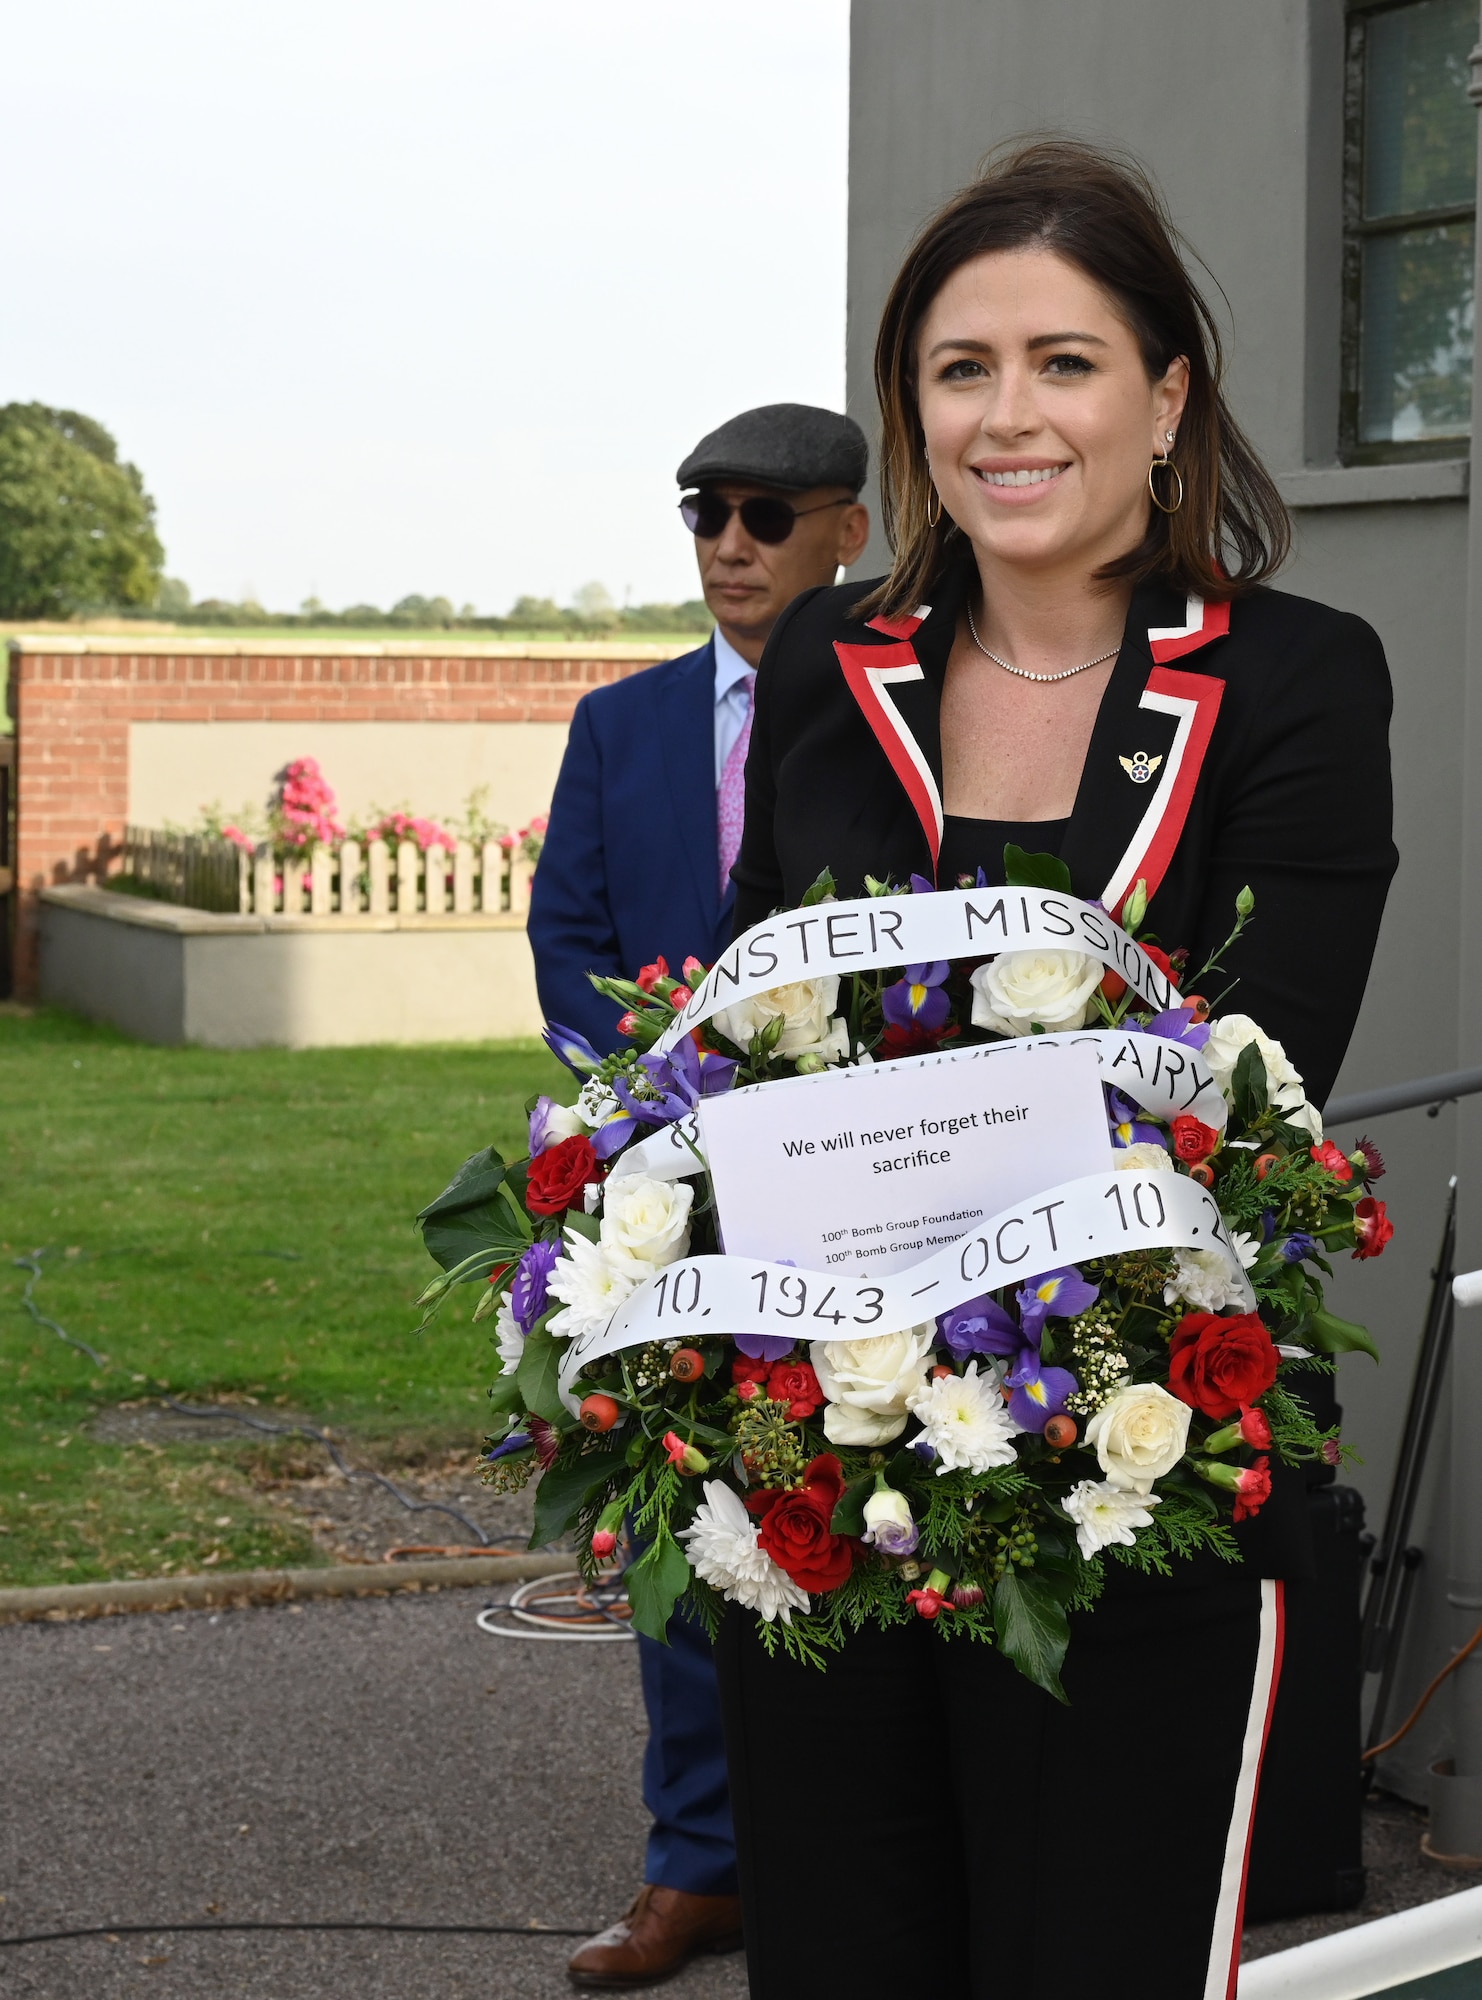 Chloe Melas, granddaughter of Capt. Frank Murphy, World War II veteran and 100th Bomb Group navigator, prepares to lay a wreath in his honor near plaques on the wall of the control tower during a ceremony honoring the 80th anniversary of “Black Week” at the 100th BG Memorial Museum at Thorpe Abbotts, Norfolk, England, Oct. 10, 2023. Melas was over from New York to visit Royal Air Force Mildenhall and Thorpe Abbotts and share her grandfather’s story. (U.S. Air Force photo by Karen Abeyasekere)